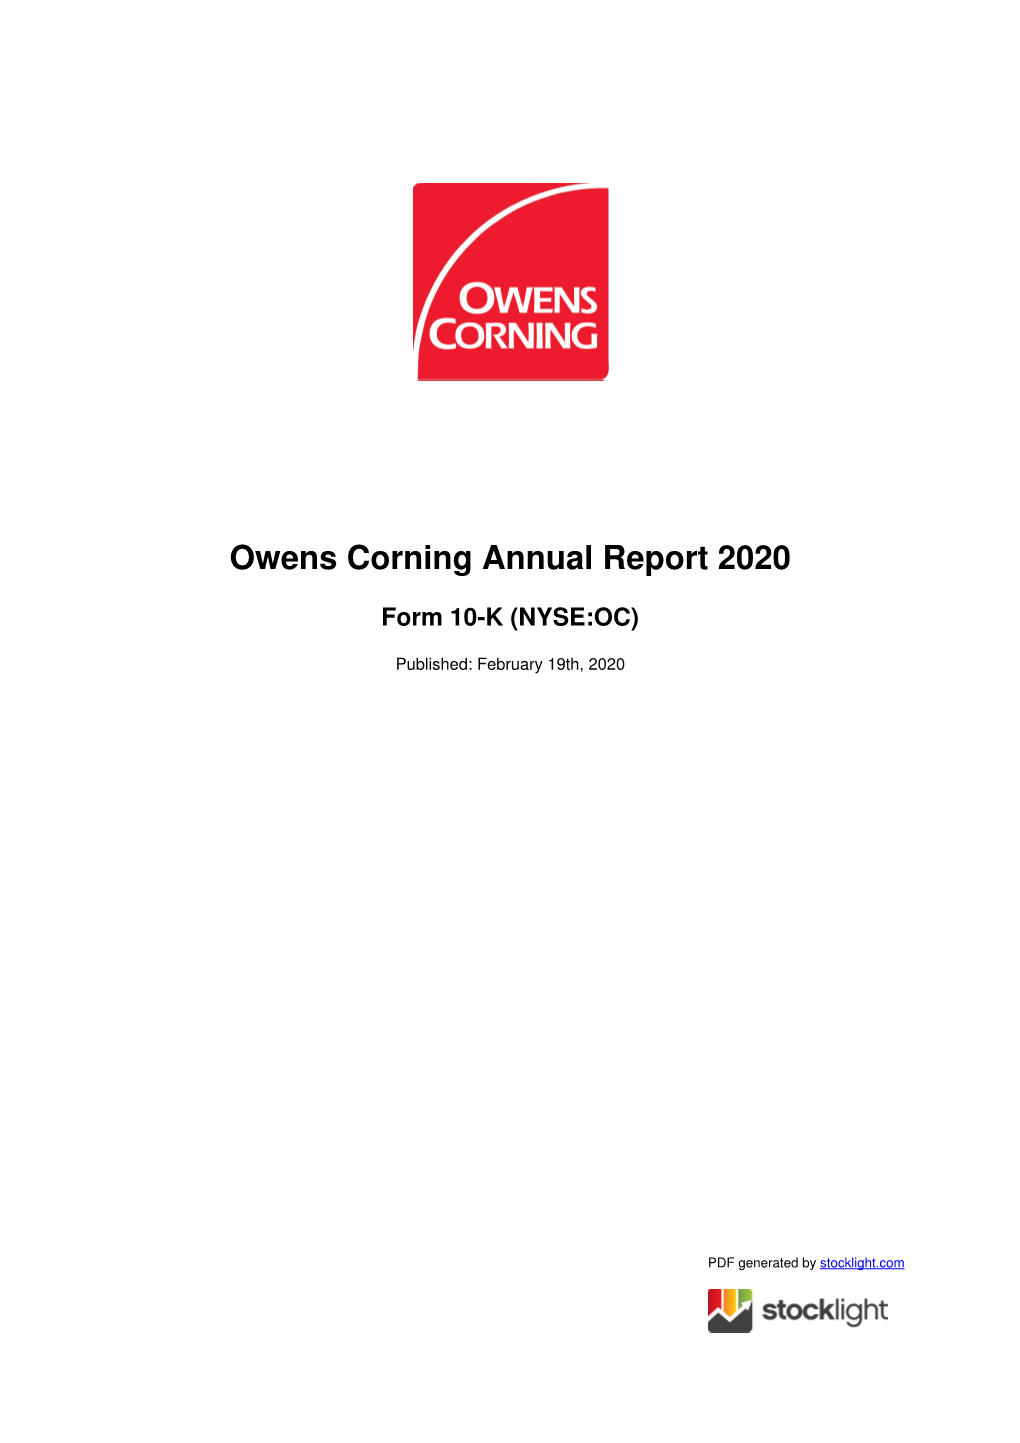 Owens Corning Annual Report 2020